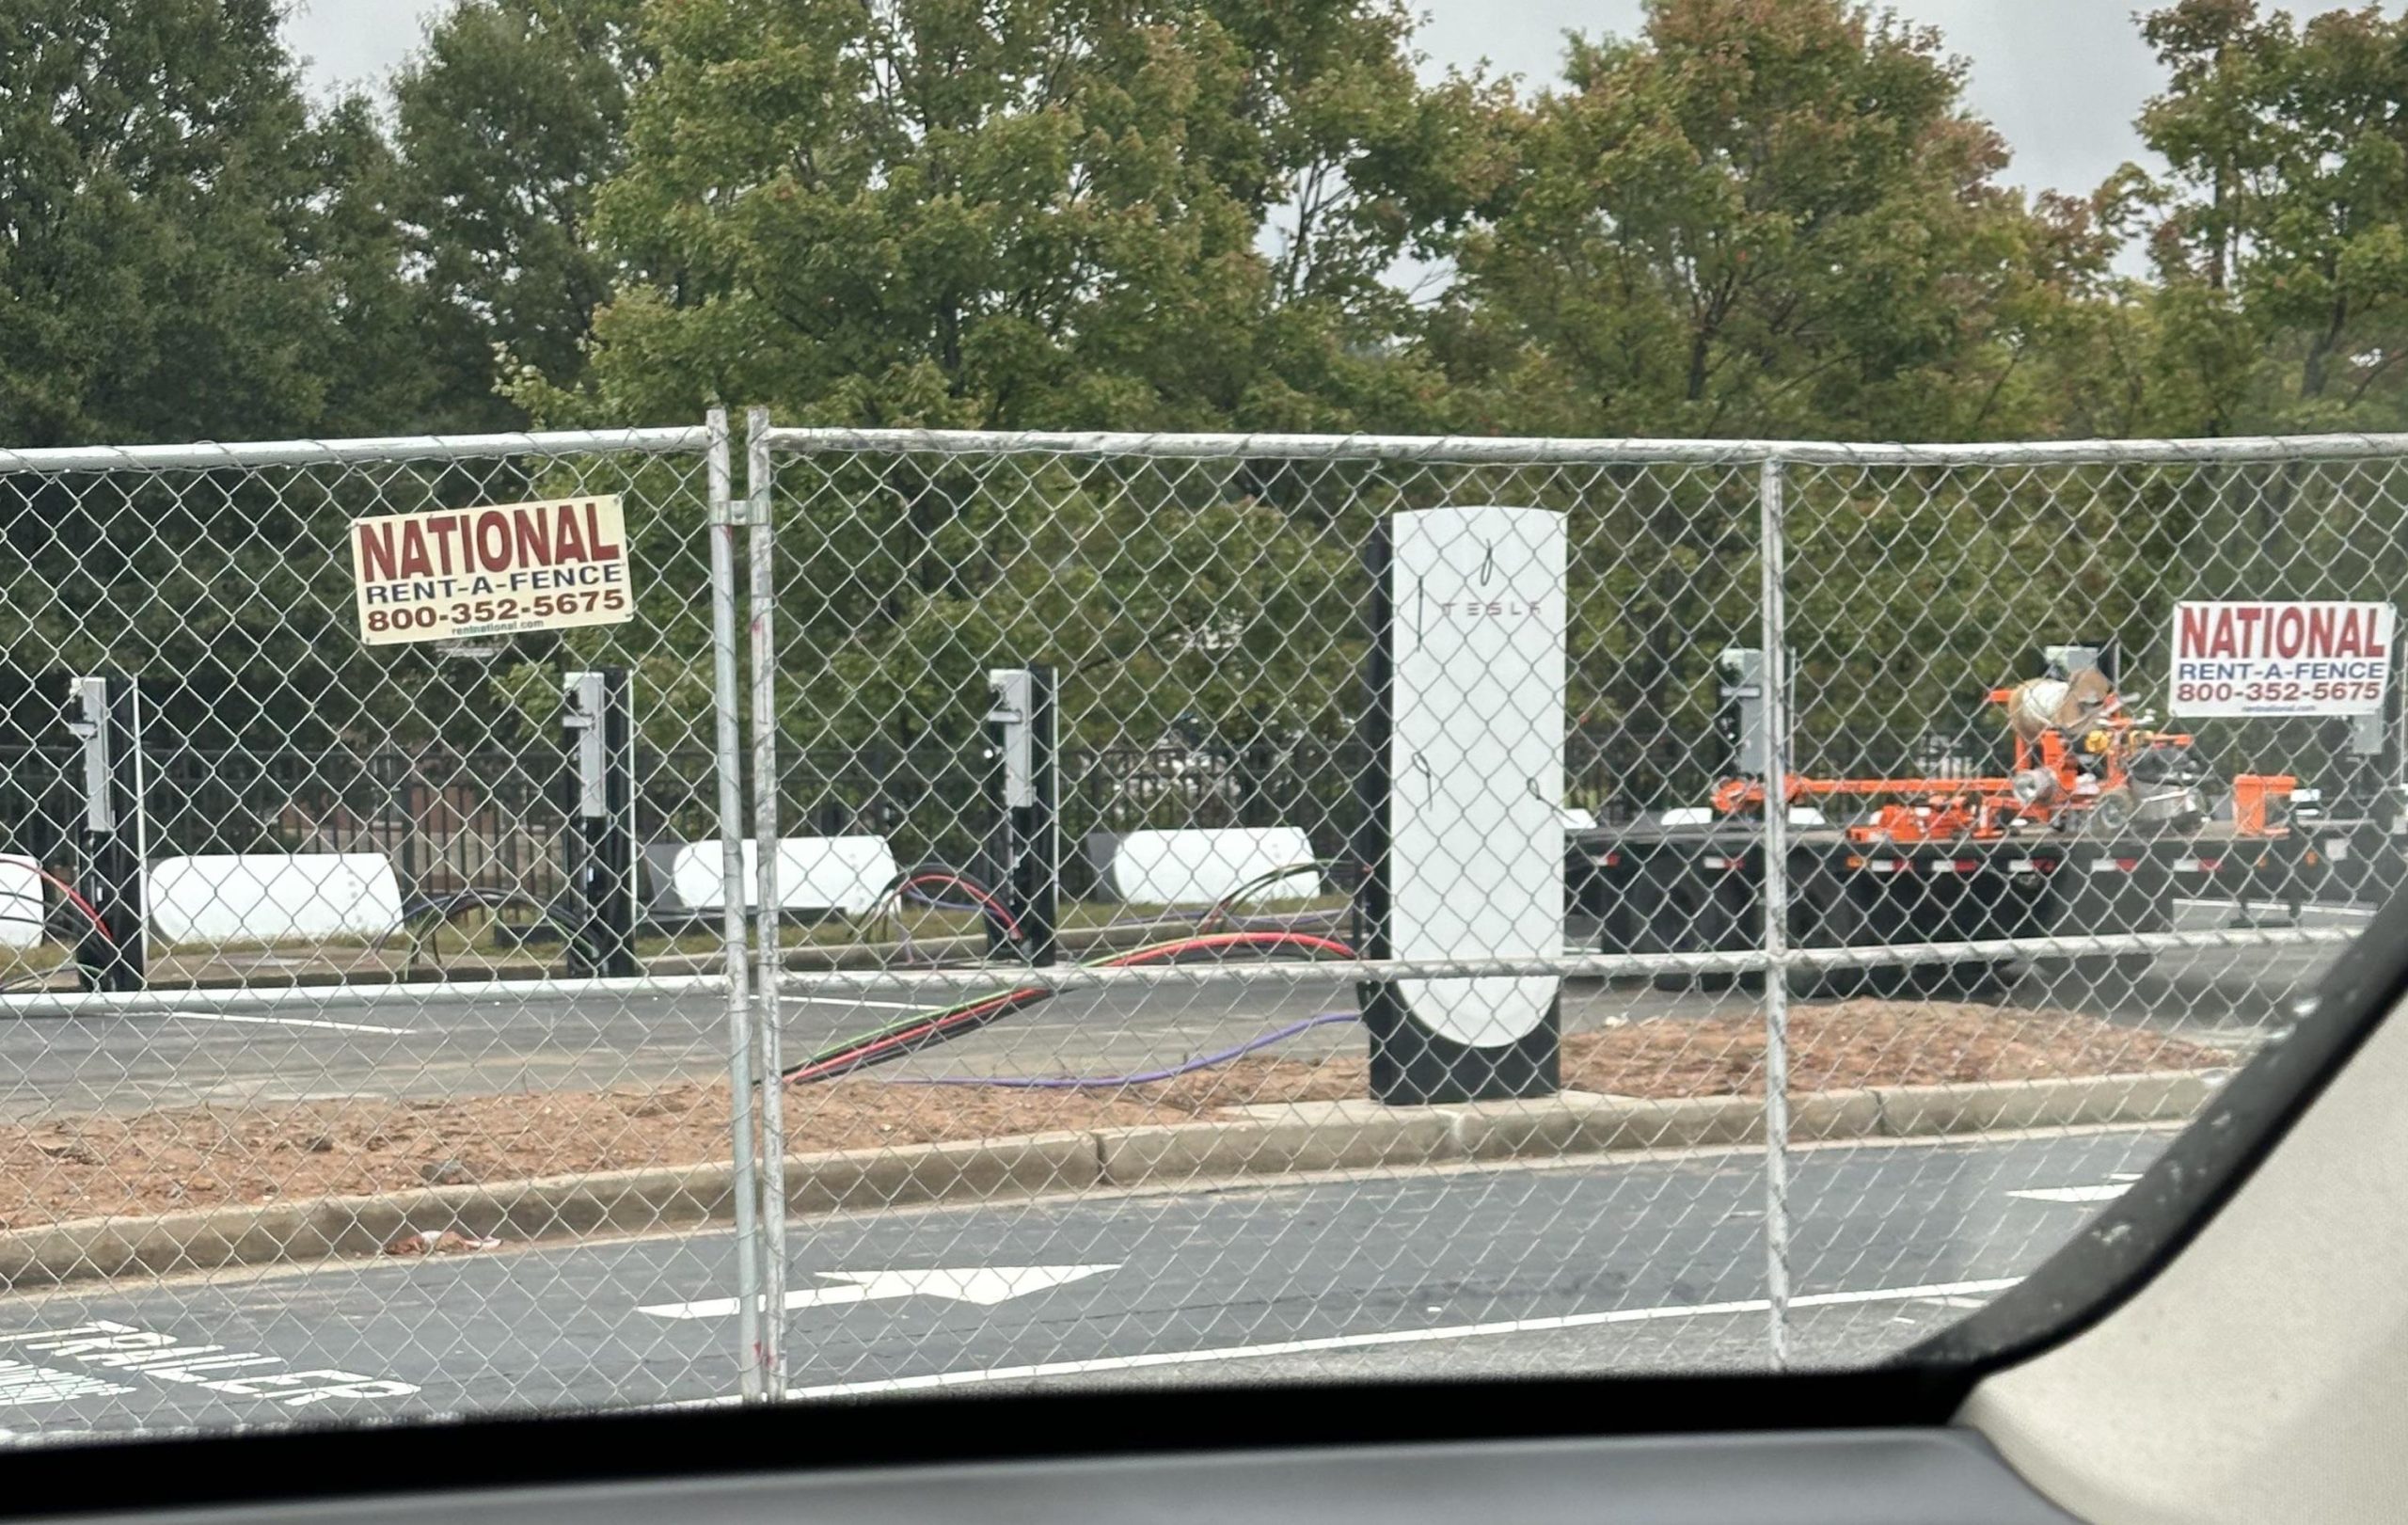 Extra Tesla V4 Superchargers have been noticed within the U.S.